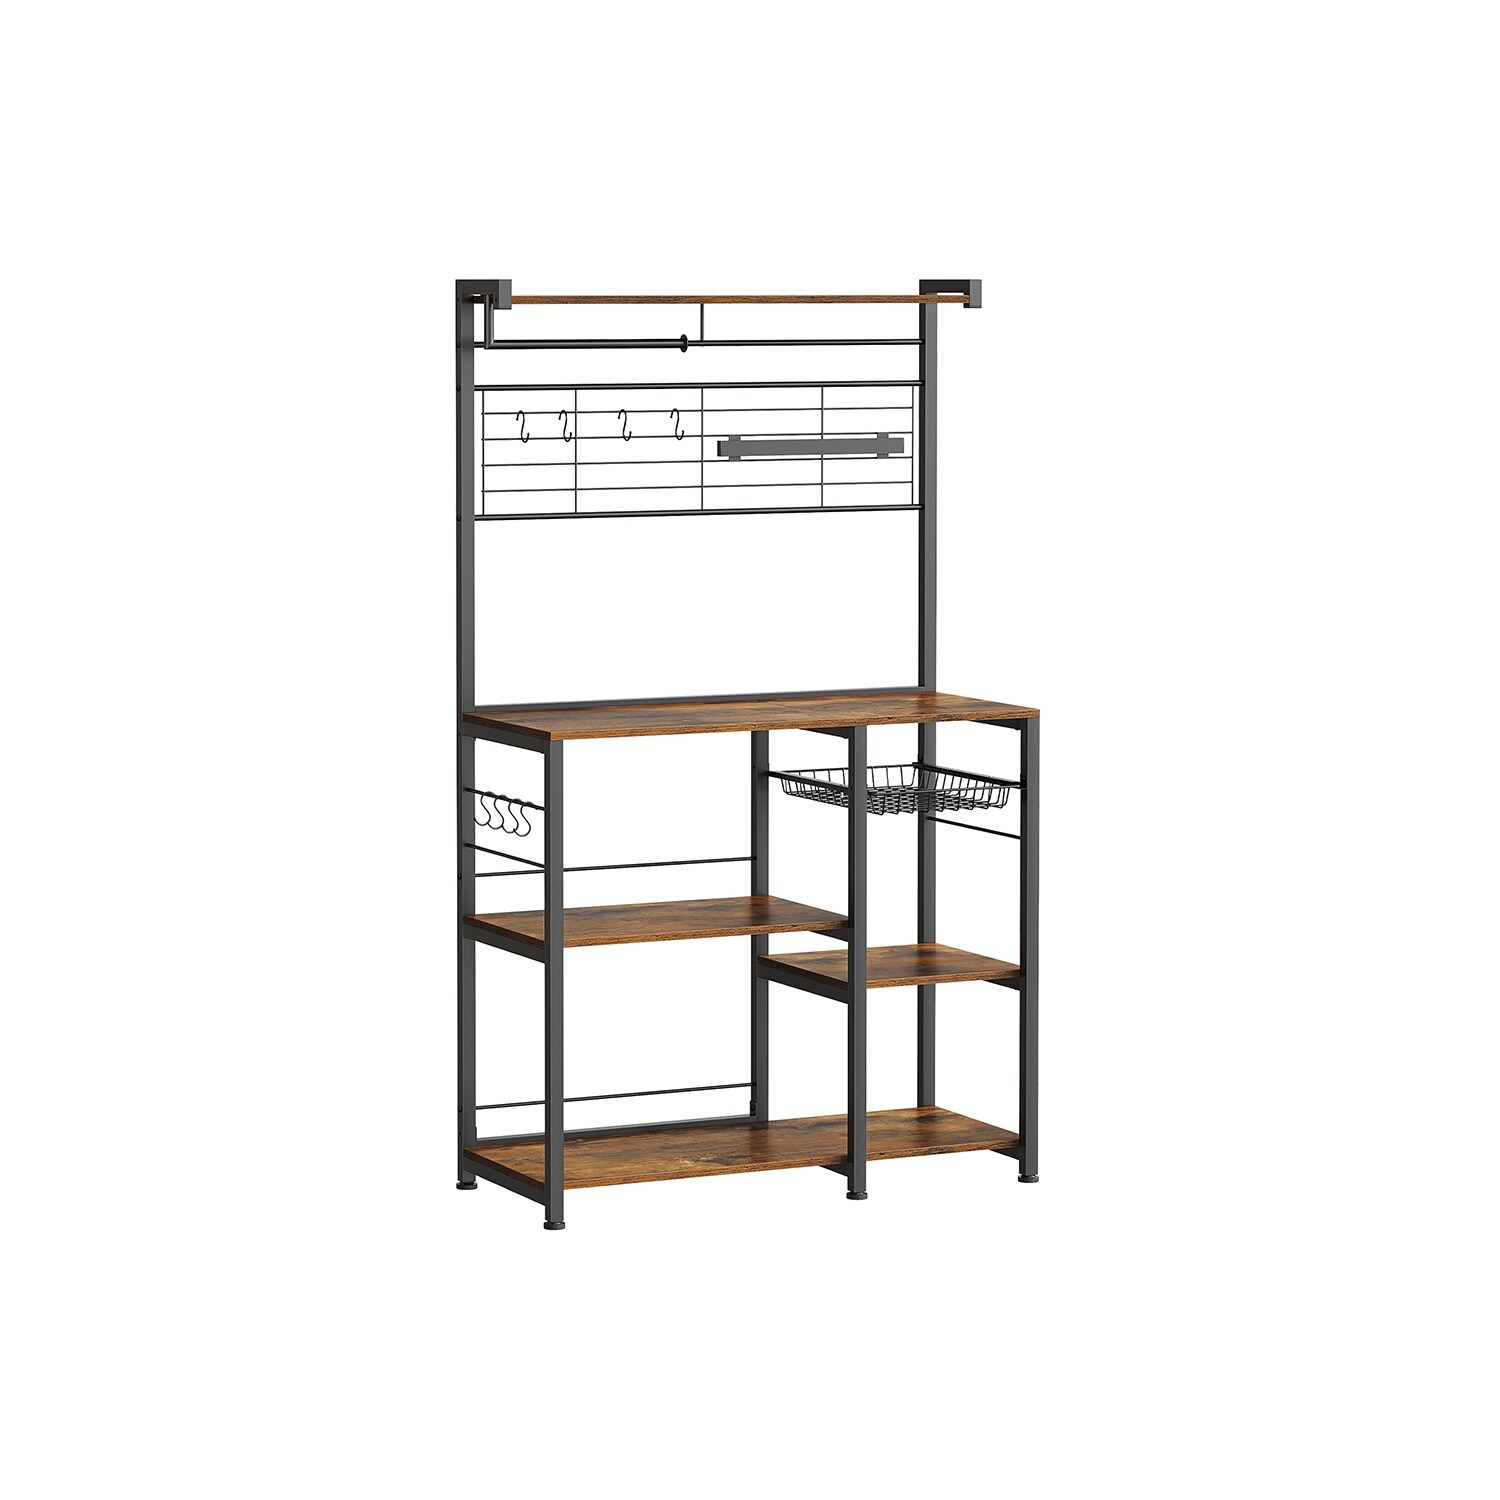 Cheflaud Rolling Kitchen Storage Cart Island with Large Open Shelves and Large Worktop, 3-Tier Kitchen Baker’s Rack with 10 Hooks, Stable Steel